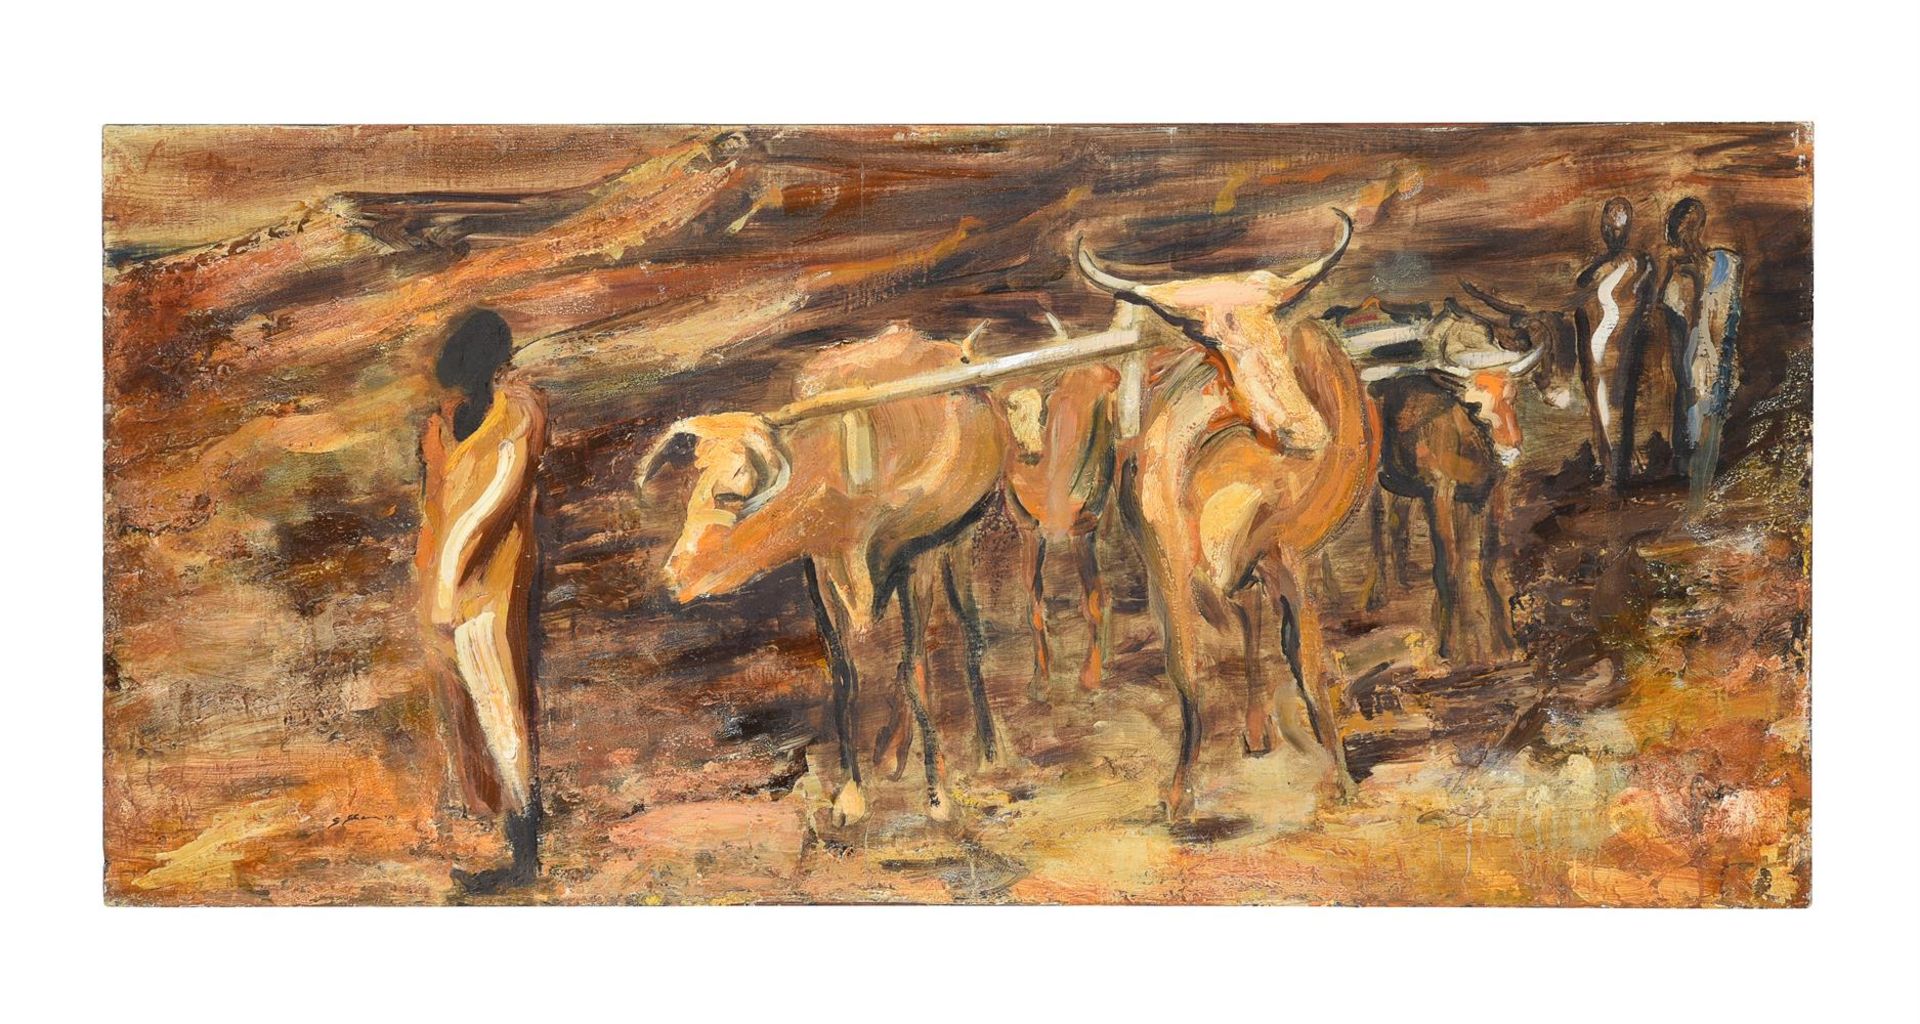 STELLA SHAWZIN (SOUTH AFRICAN 1920-2020), OX AND PLOUGH